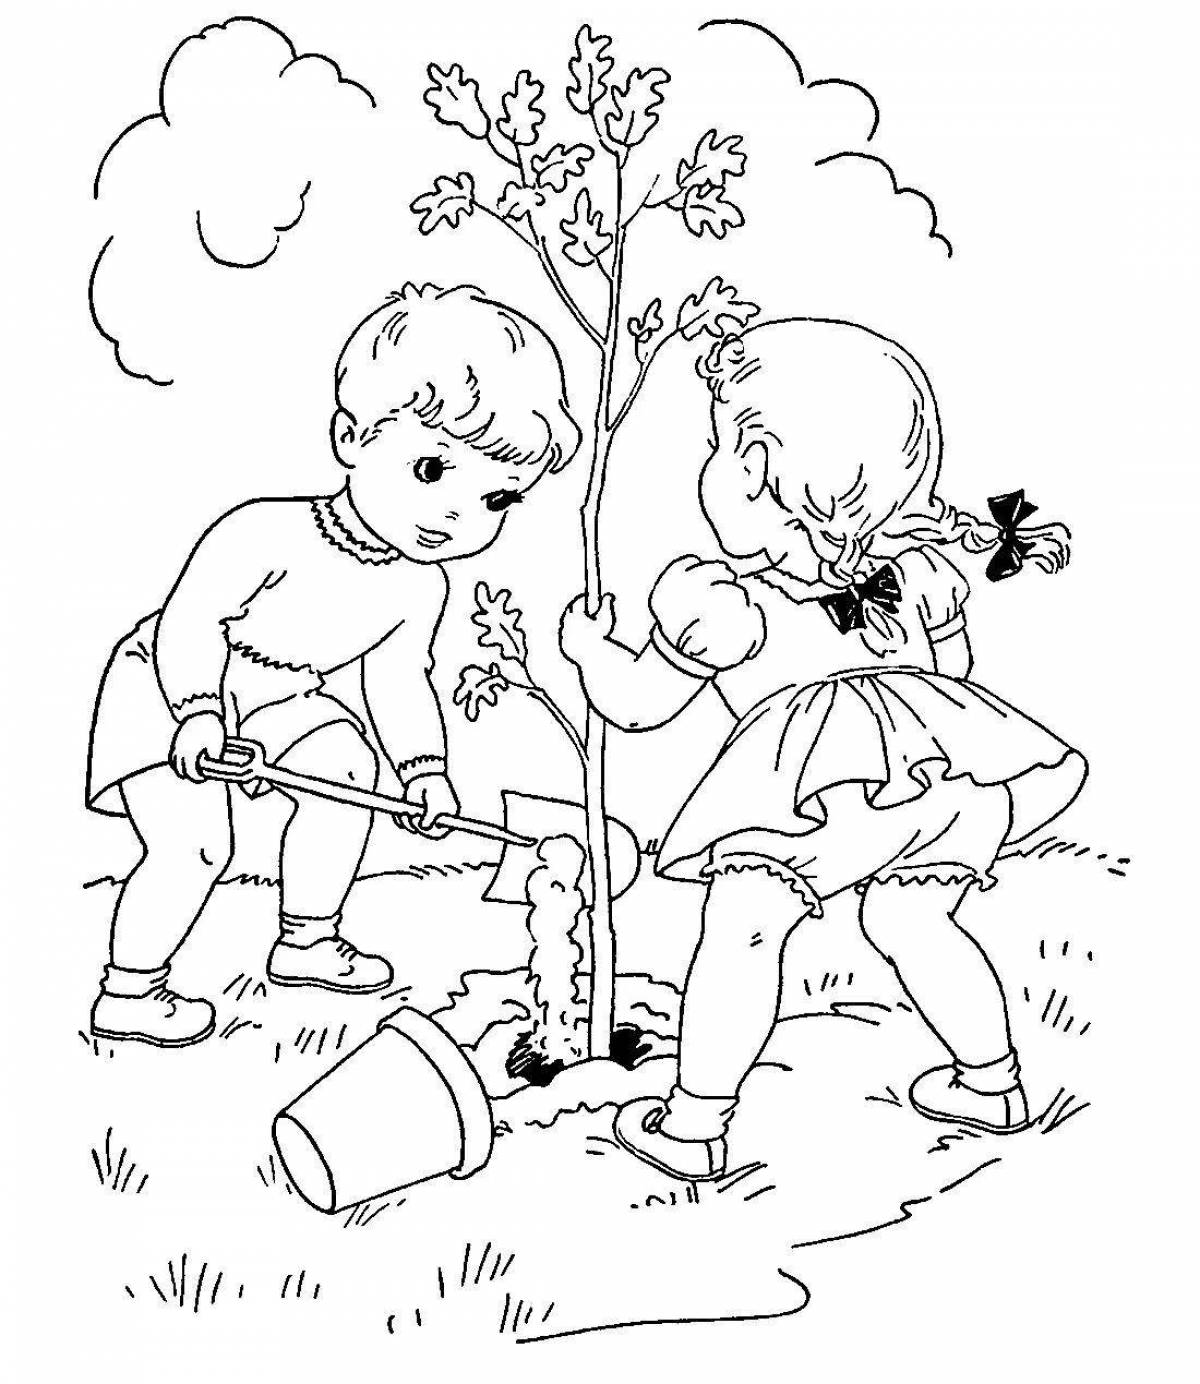 Amazing man and nature coloring page